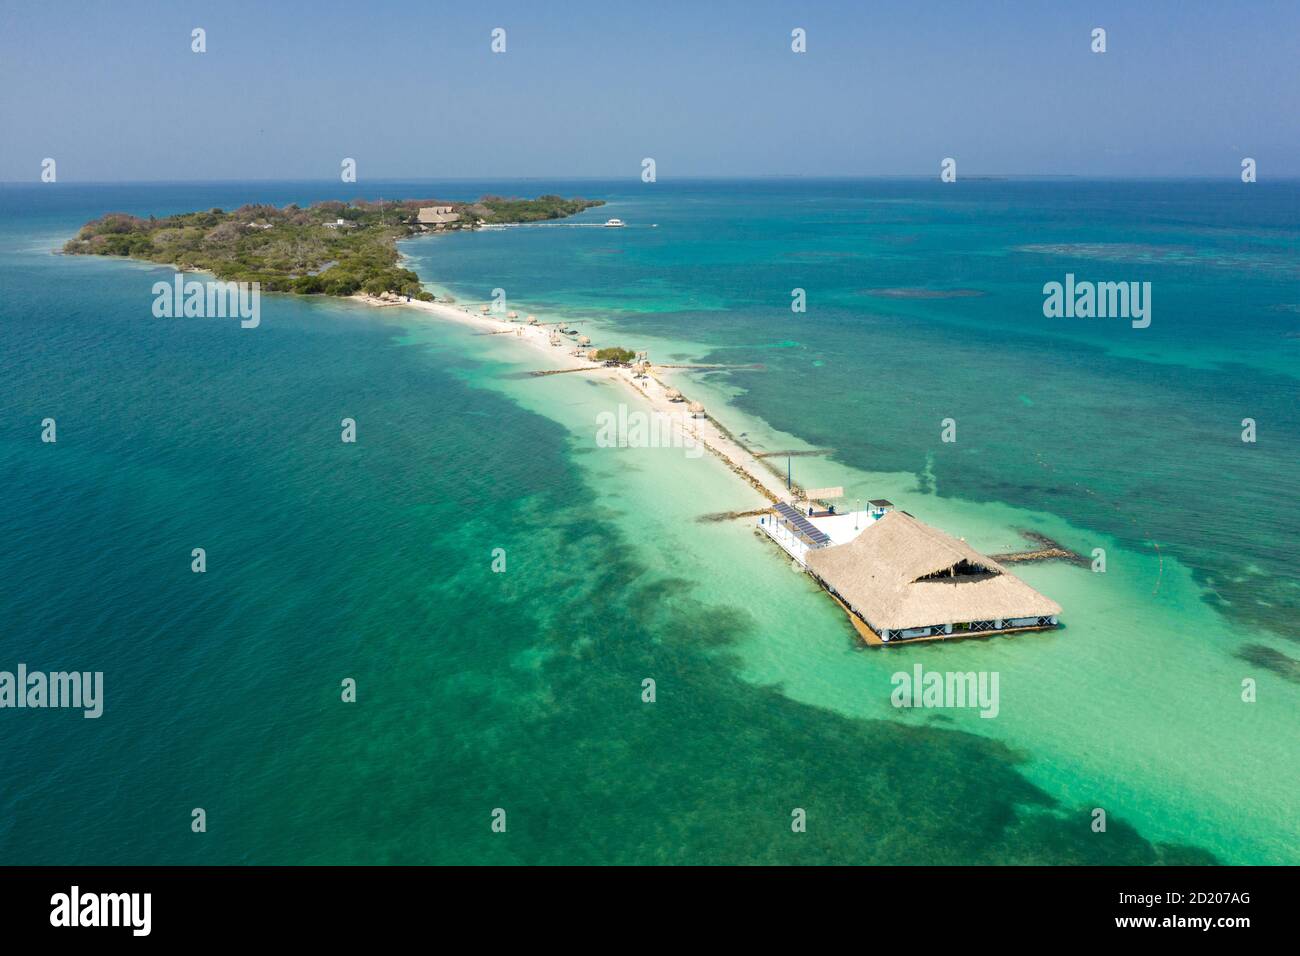 Tropical paradise white sand beach and relaxation zone on the island Cartagena Colombia aerial view. Stock Photo